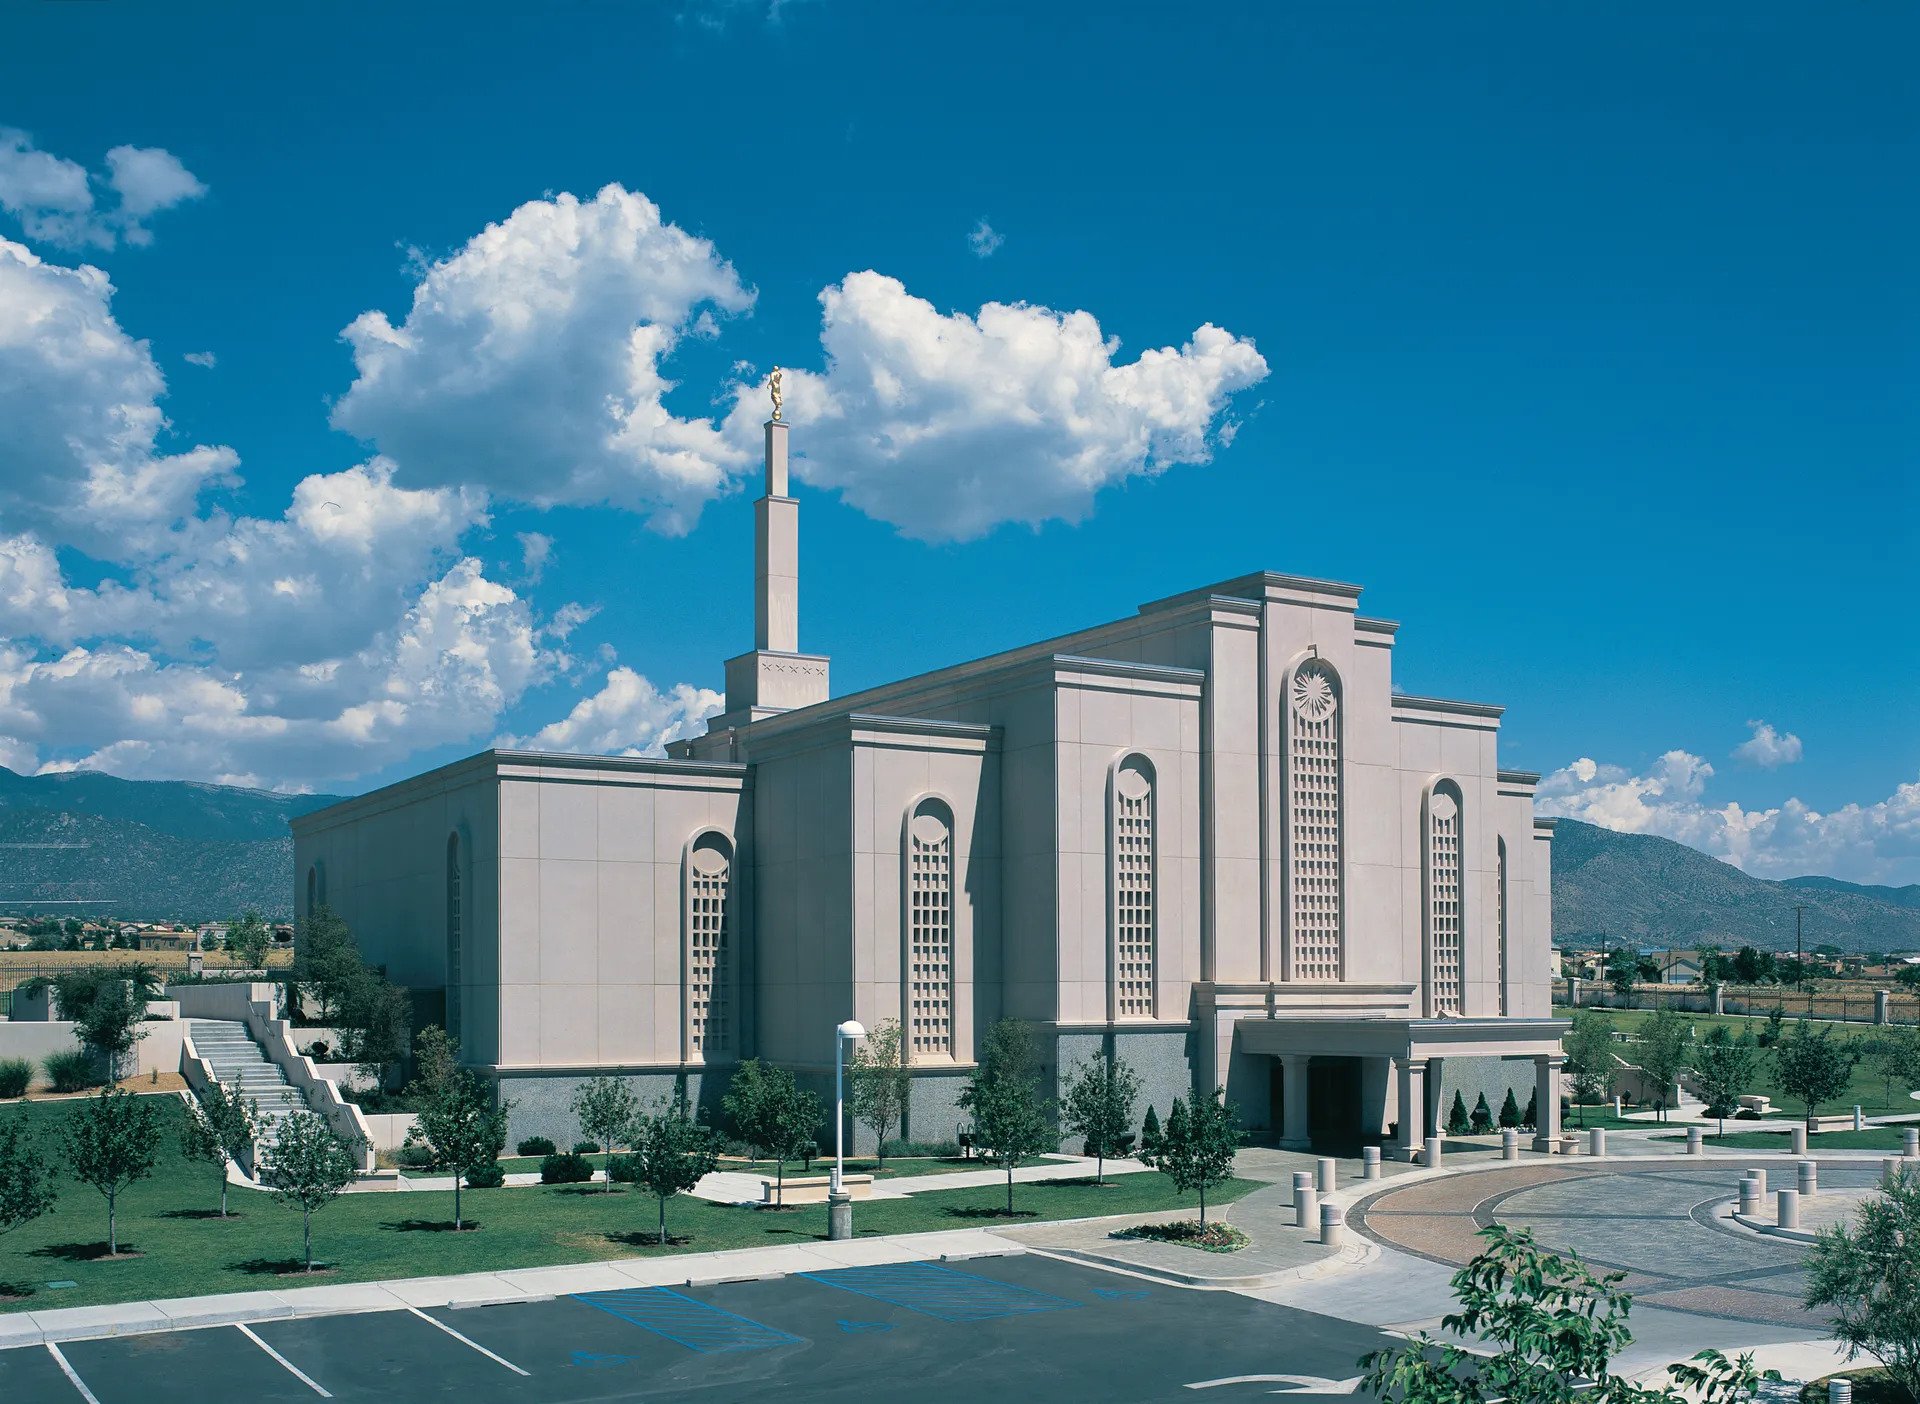 The exterior of the Albuquerque New Mexico Temple, a white building with flat roofs cascading down from a center spire.